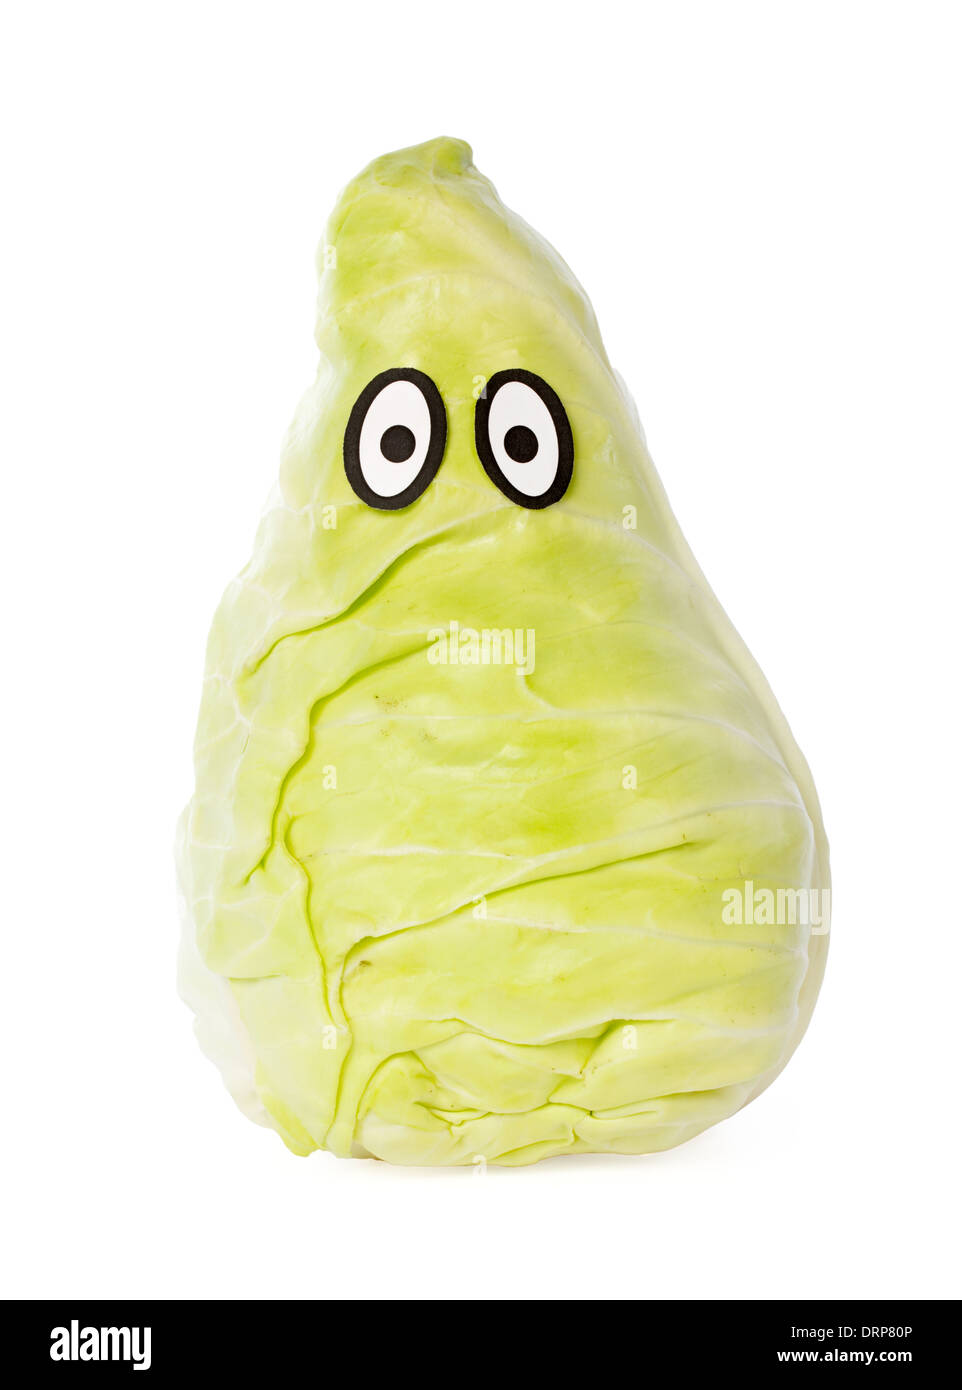 Pointed cabbage head with eyes against white background Stock Photo